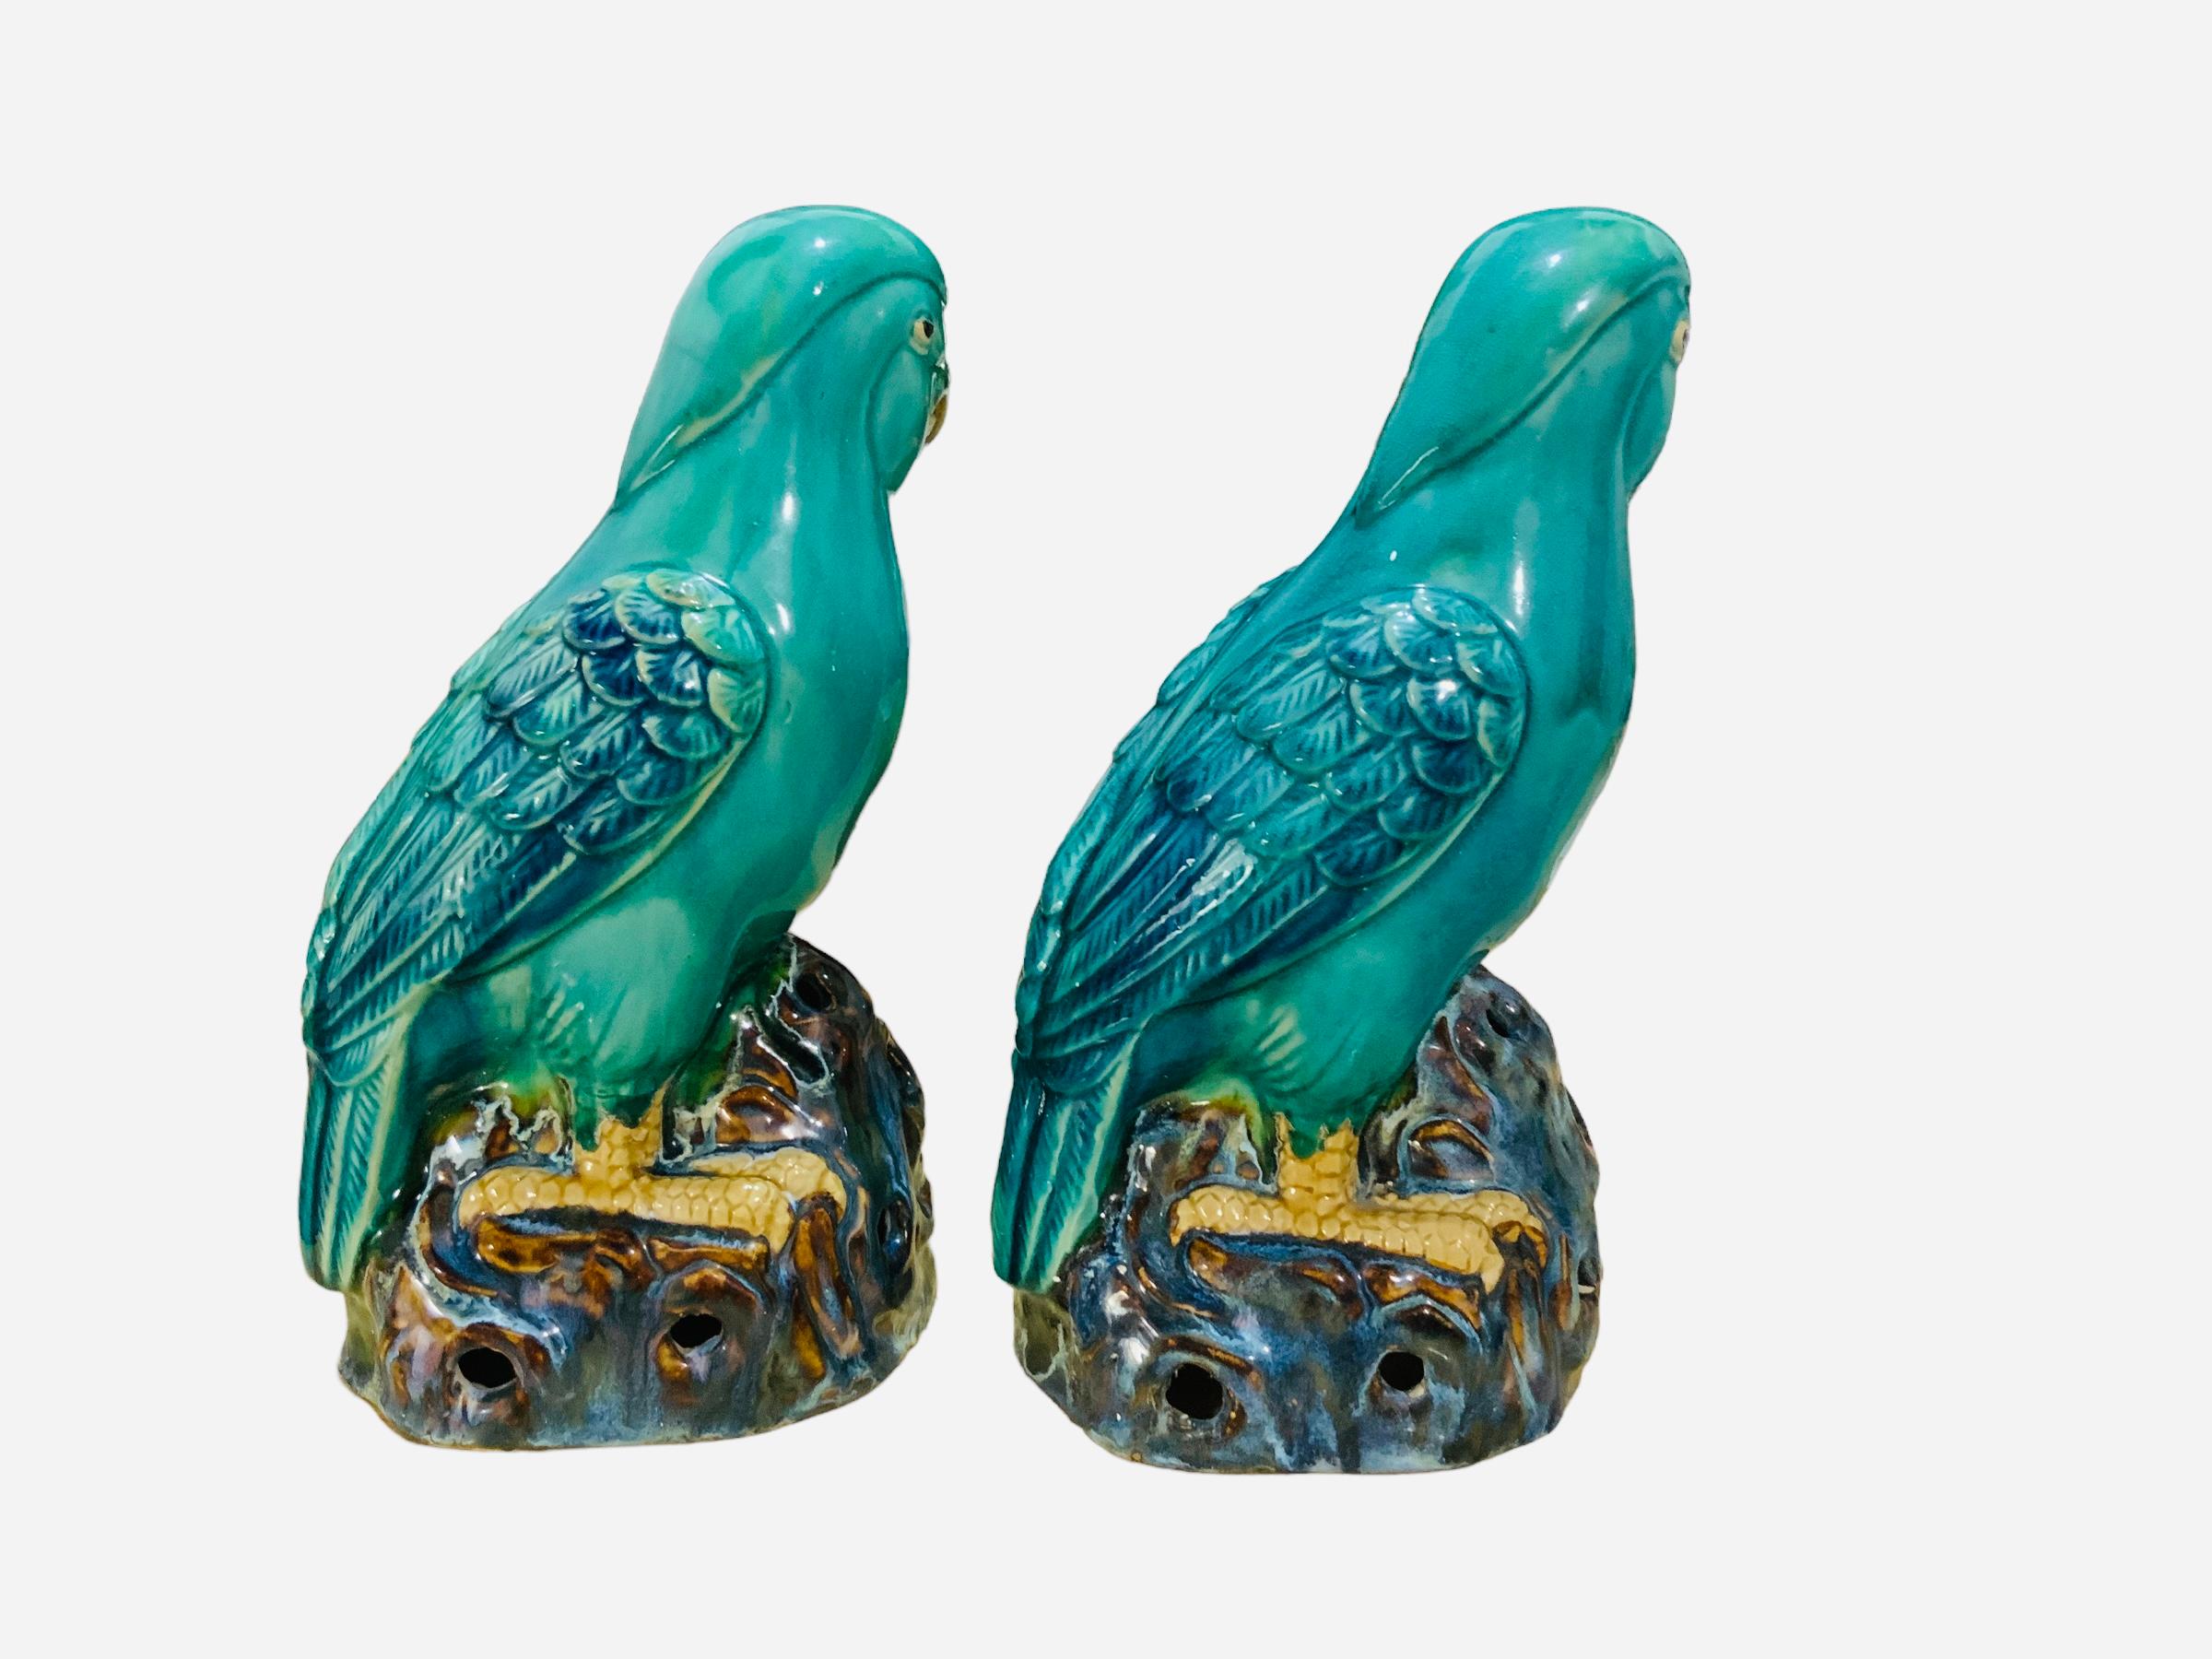 Chinese Export Pair Of Hand Painted Chinese Ceramic Parrots